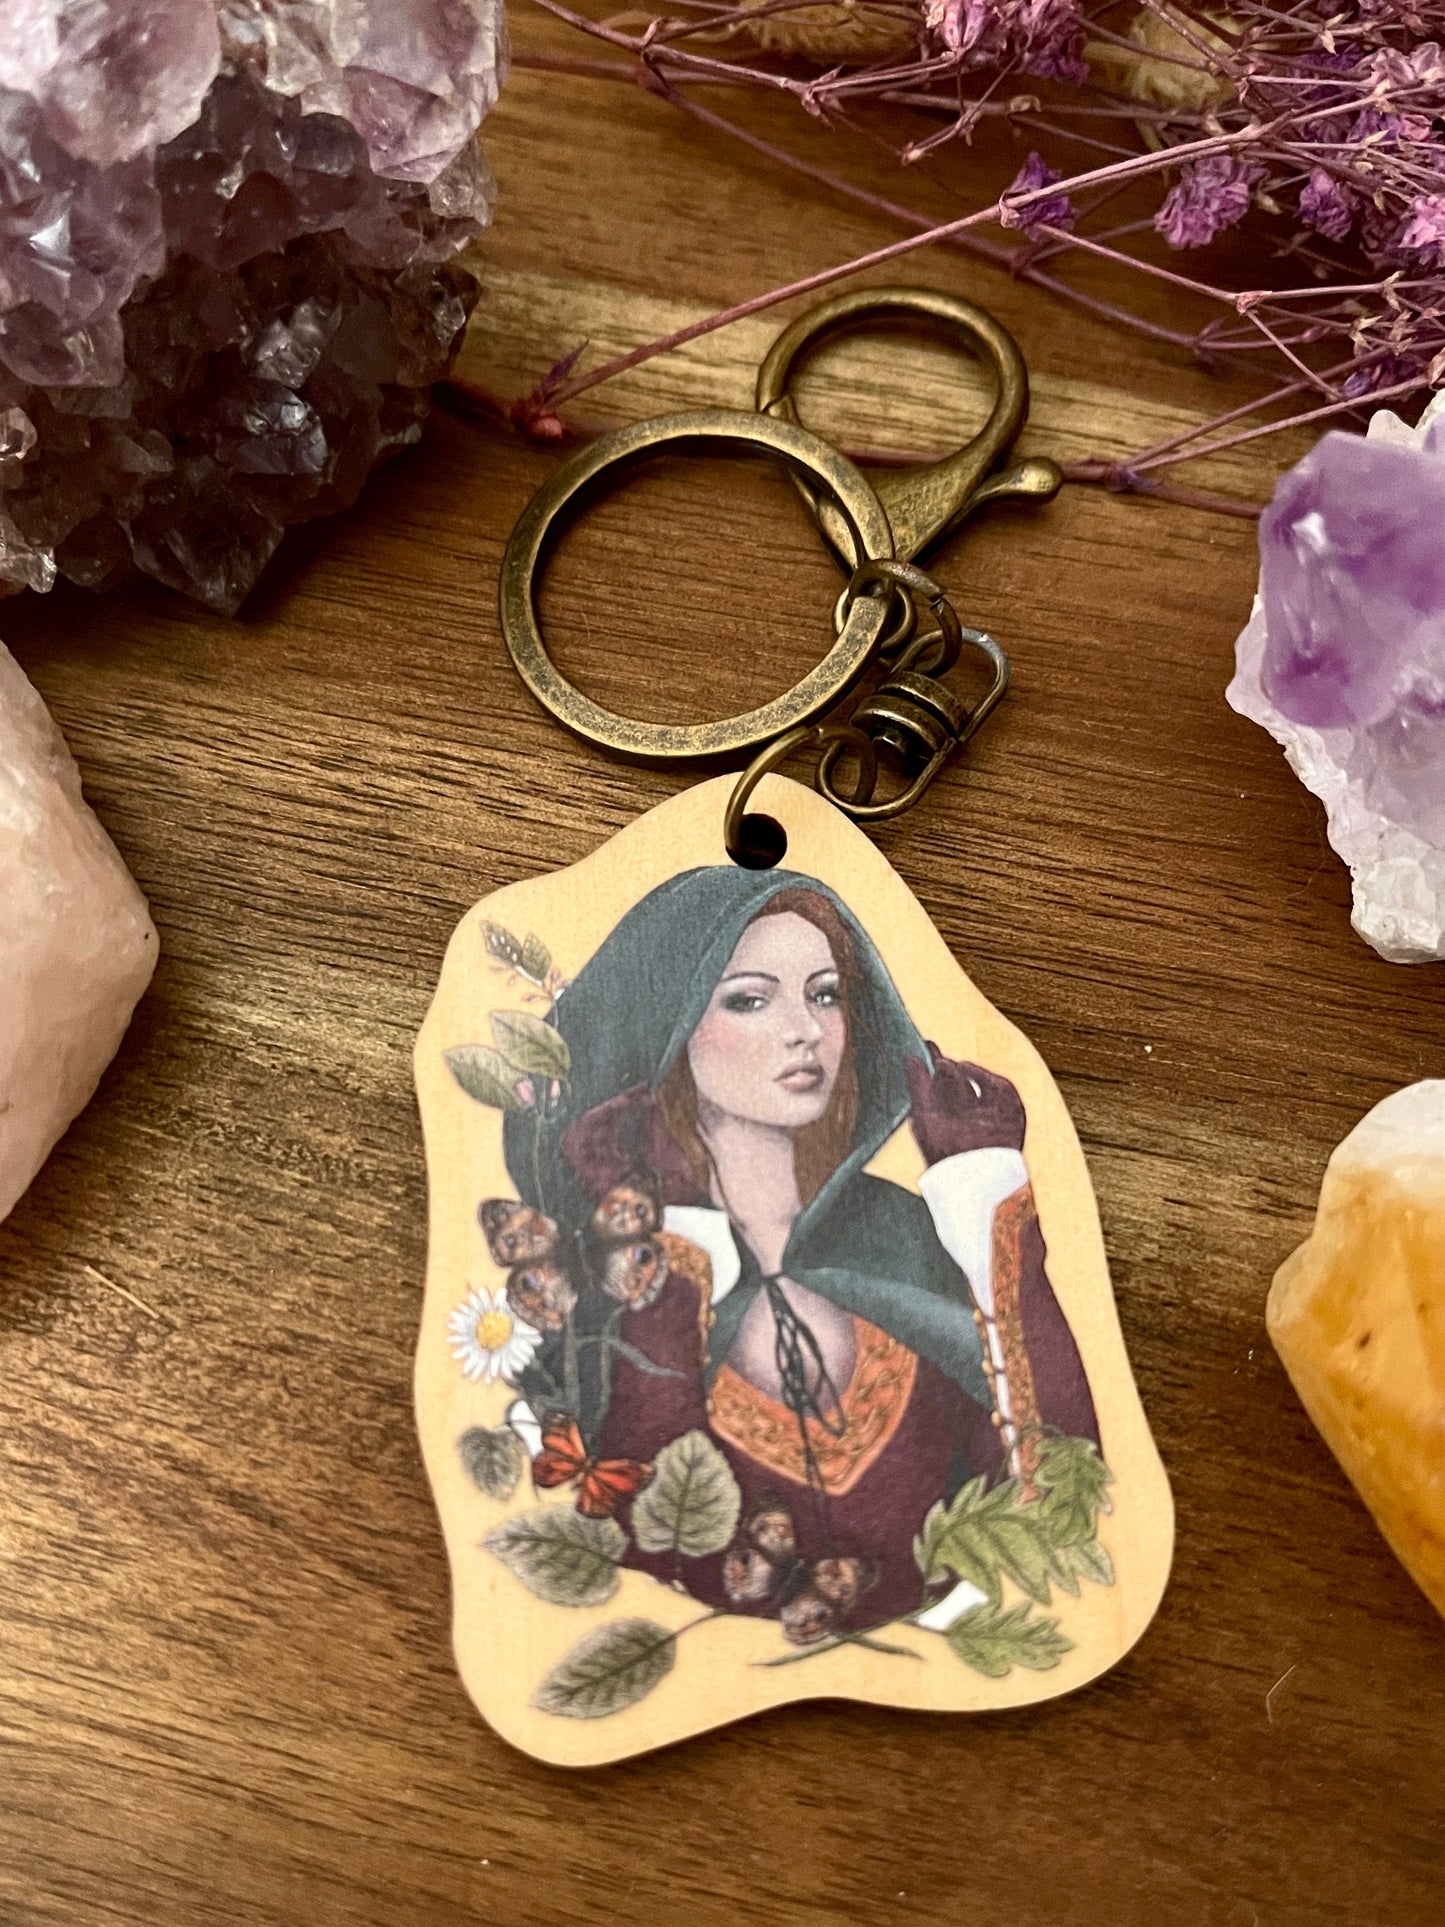 Hedge witch keyring